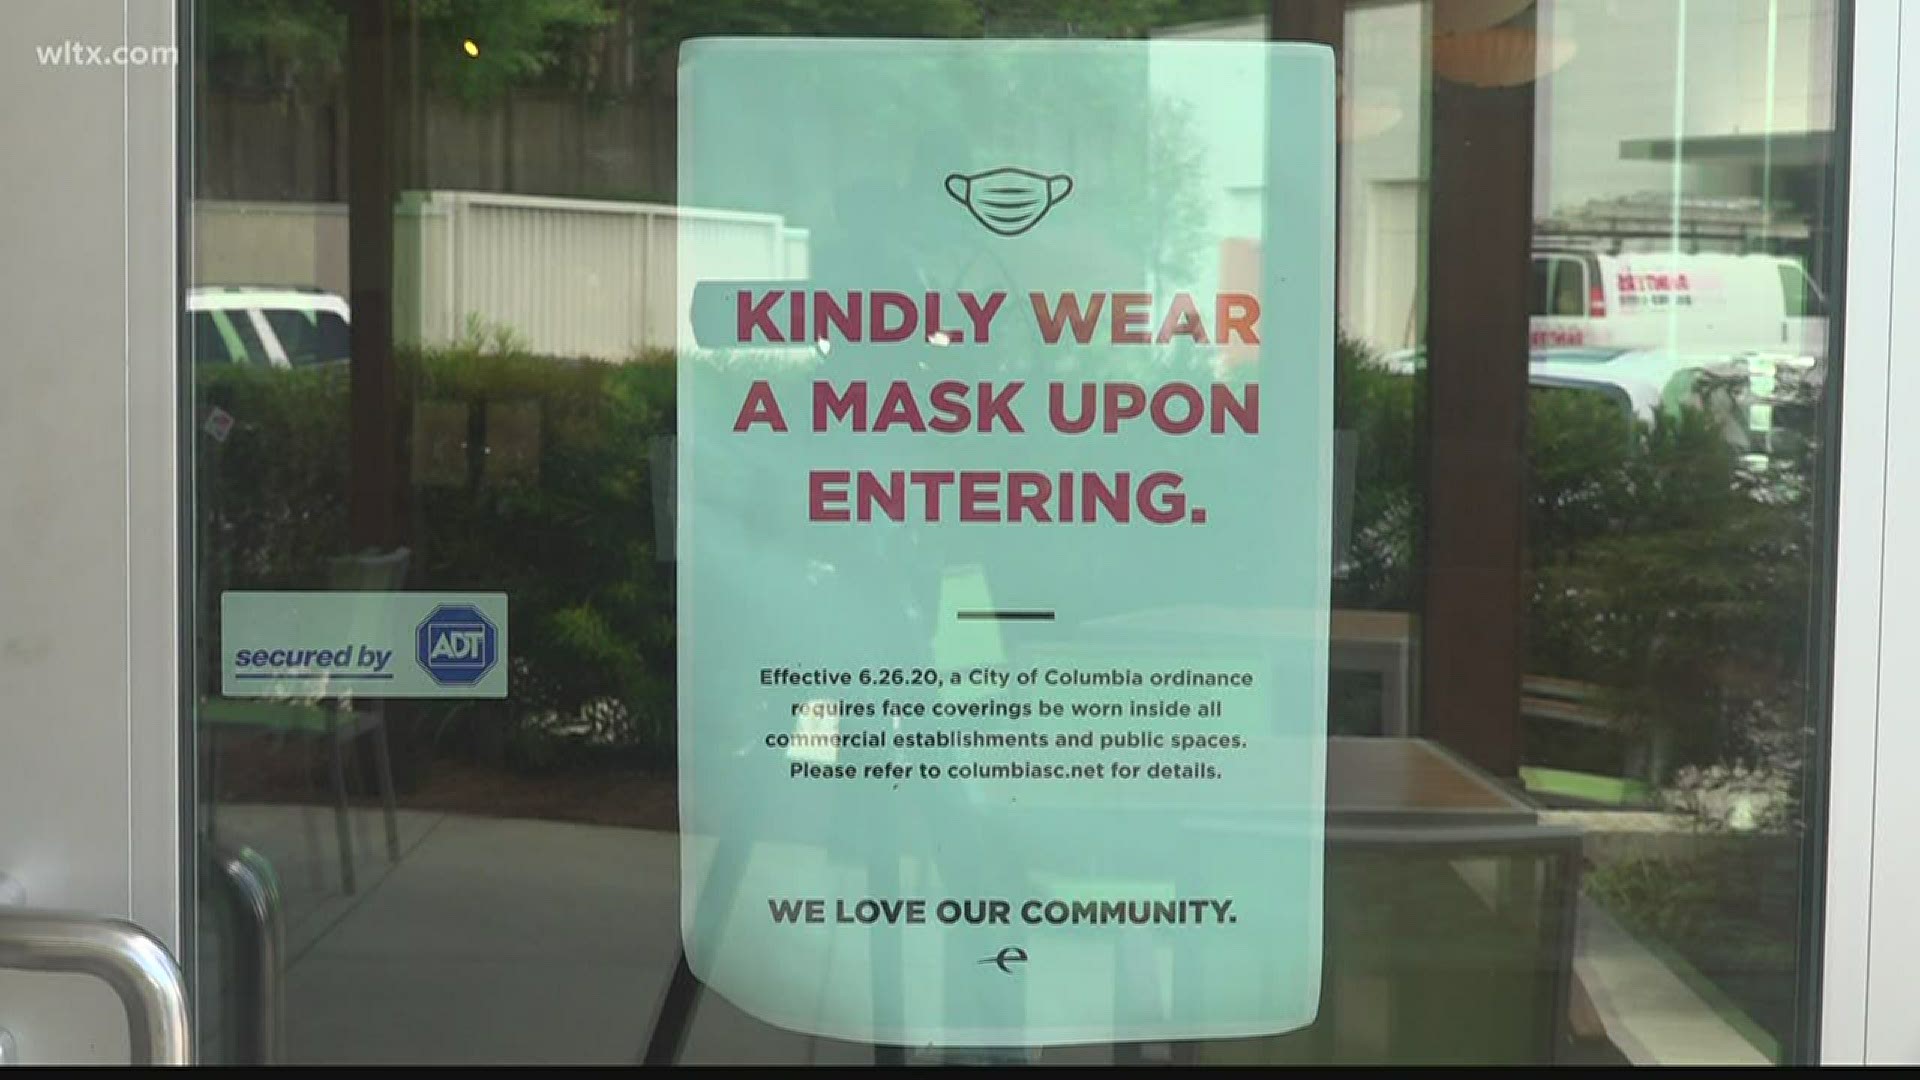 Gov McMaster's new rules for restaurants begins on Monday with 50% capacity, everyone wears mask and practice social distancing.